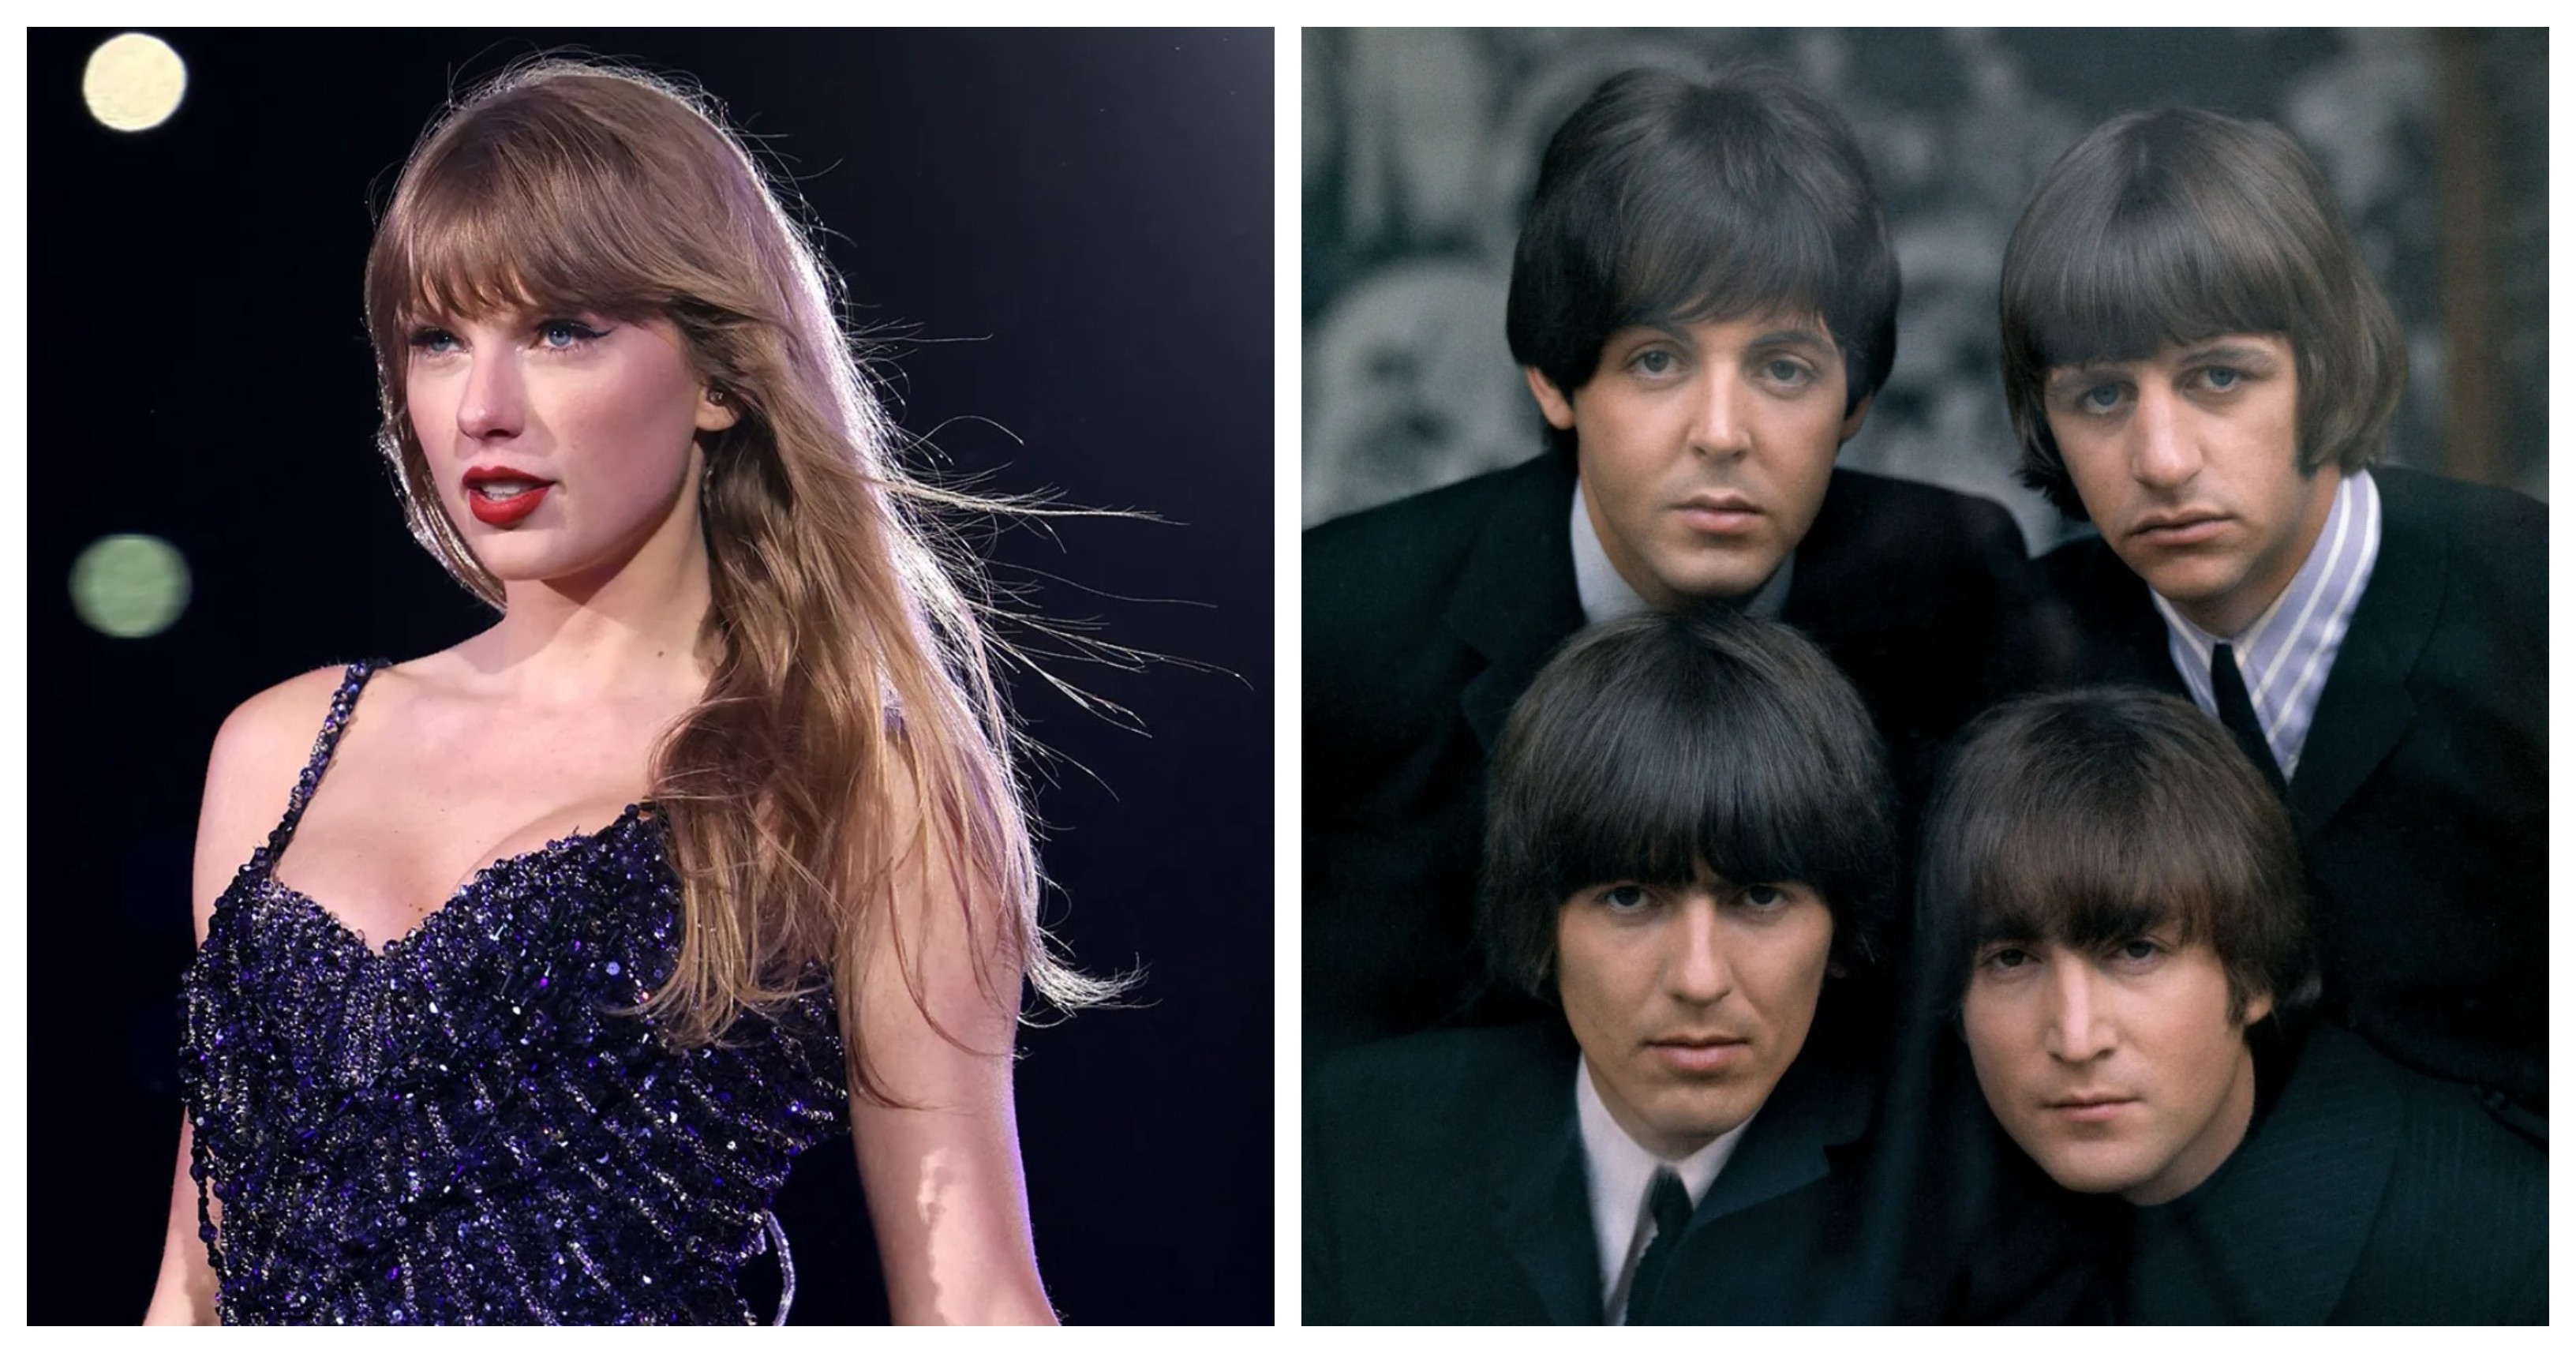 collage of taylor swift courtesy billboard and the beatles courtesy britannica